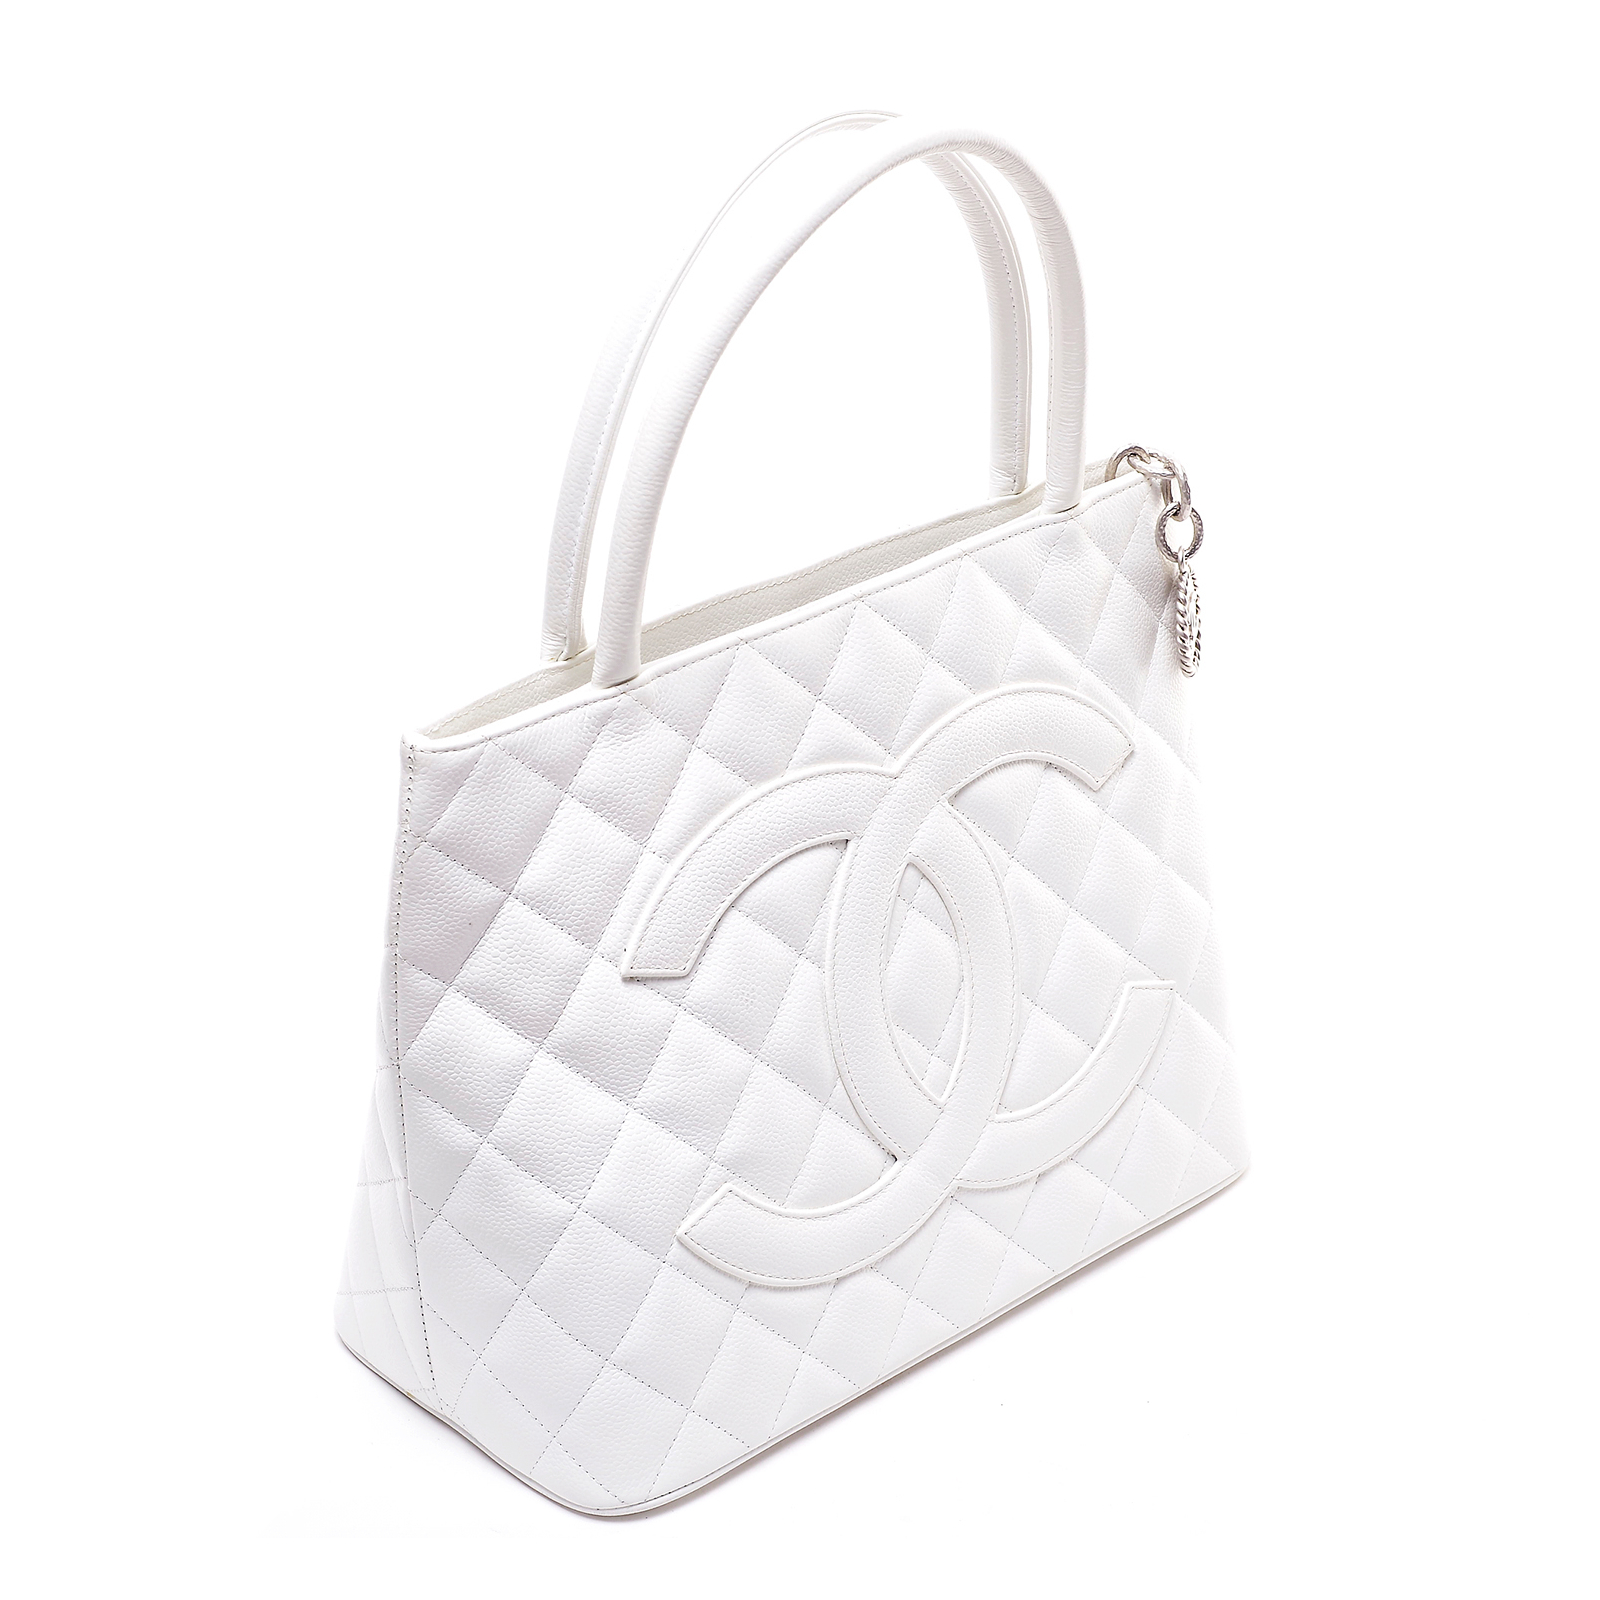 WHITE QUILTED CAVIAR LEATHER 'CC' LOGO SILVER TONED MEDALLION TOTE BAG